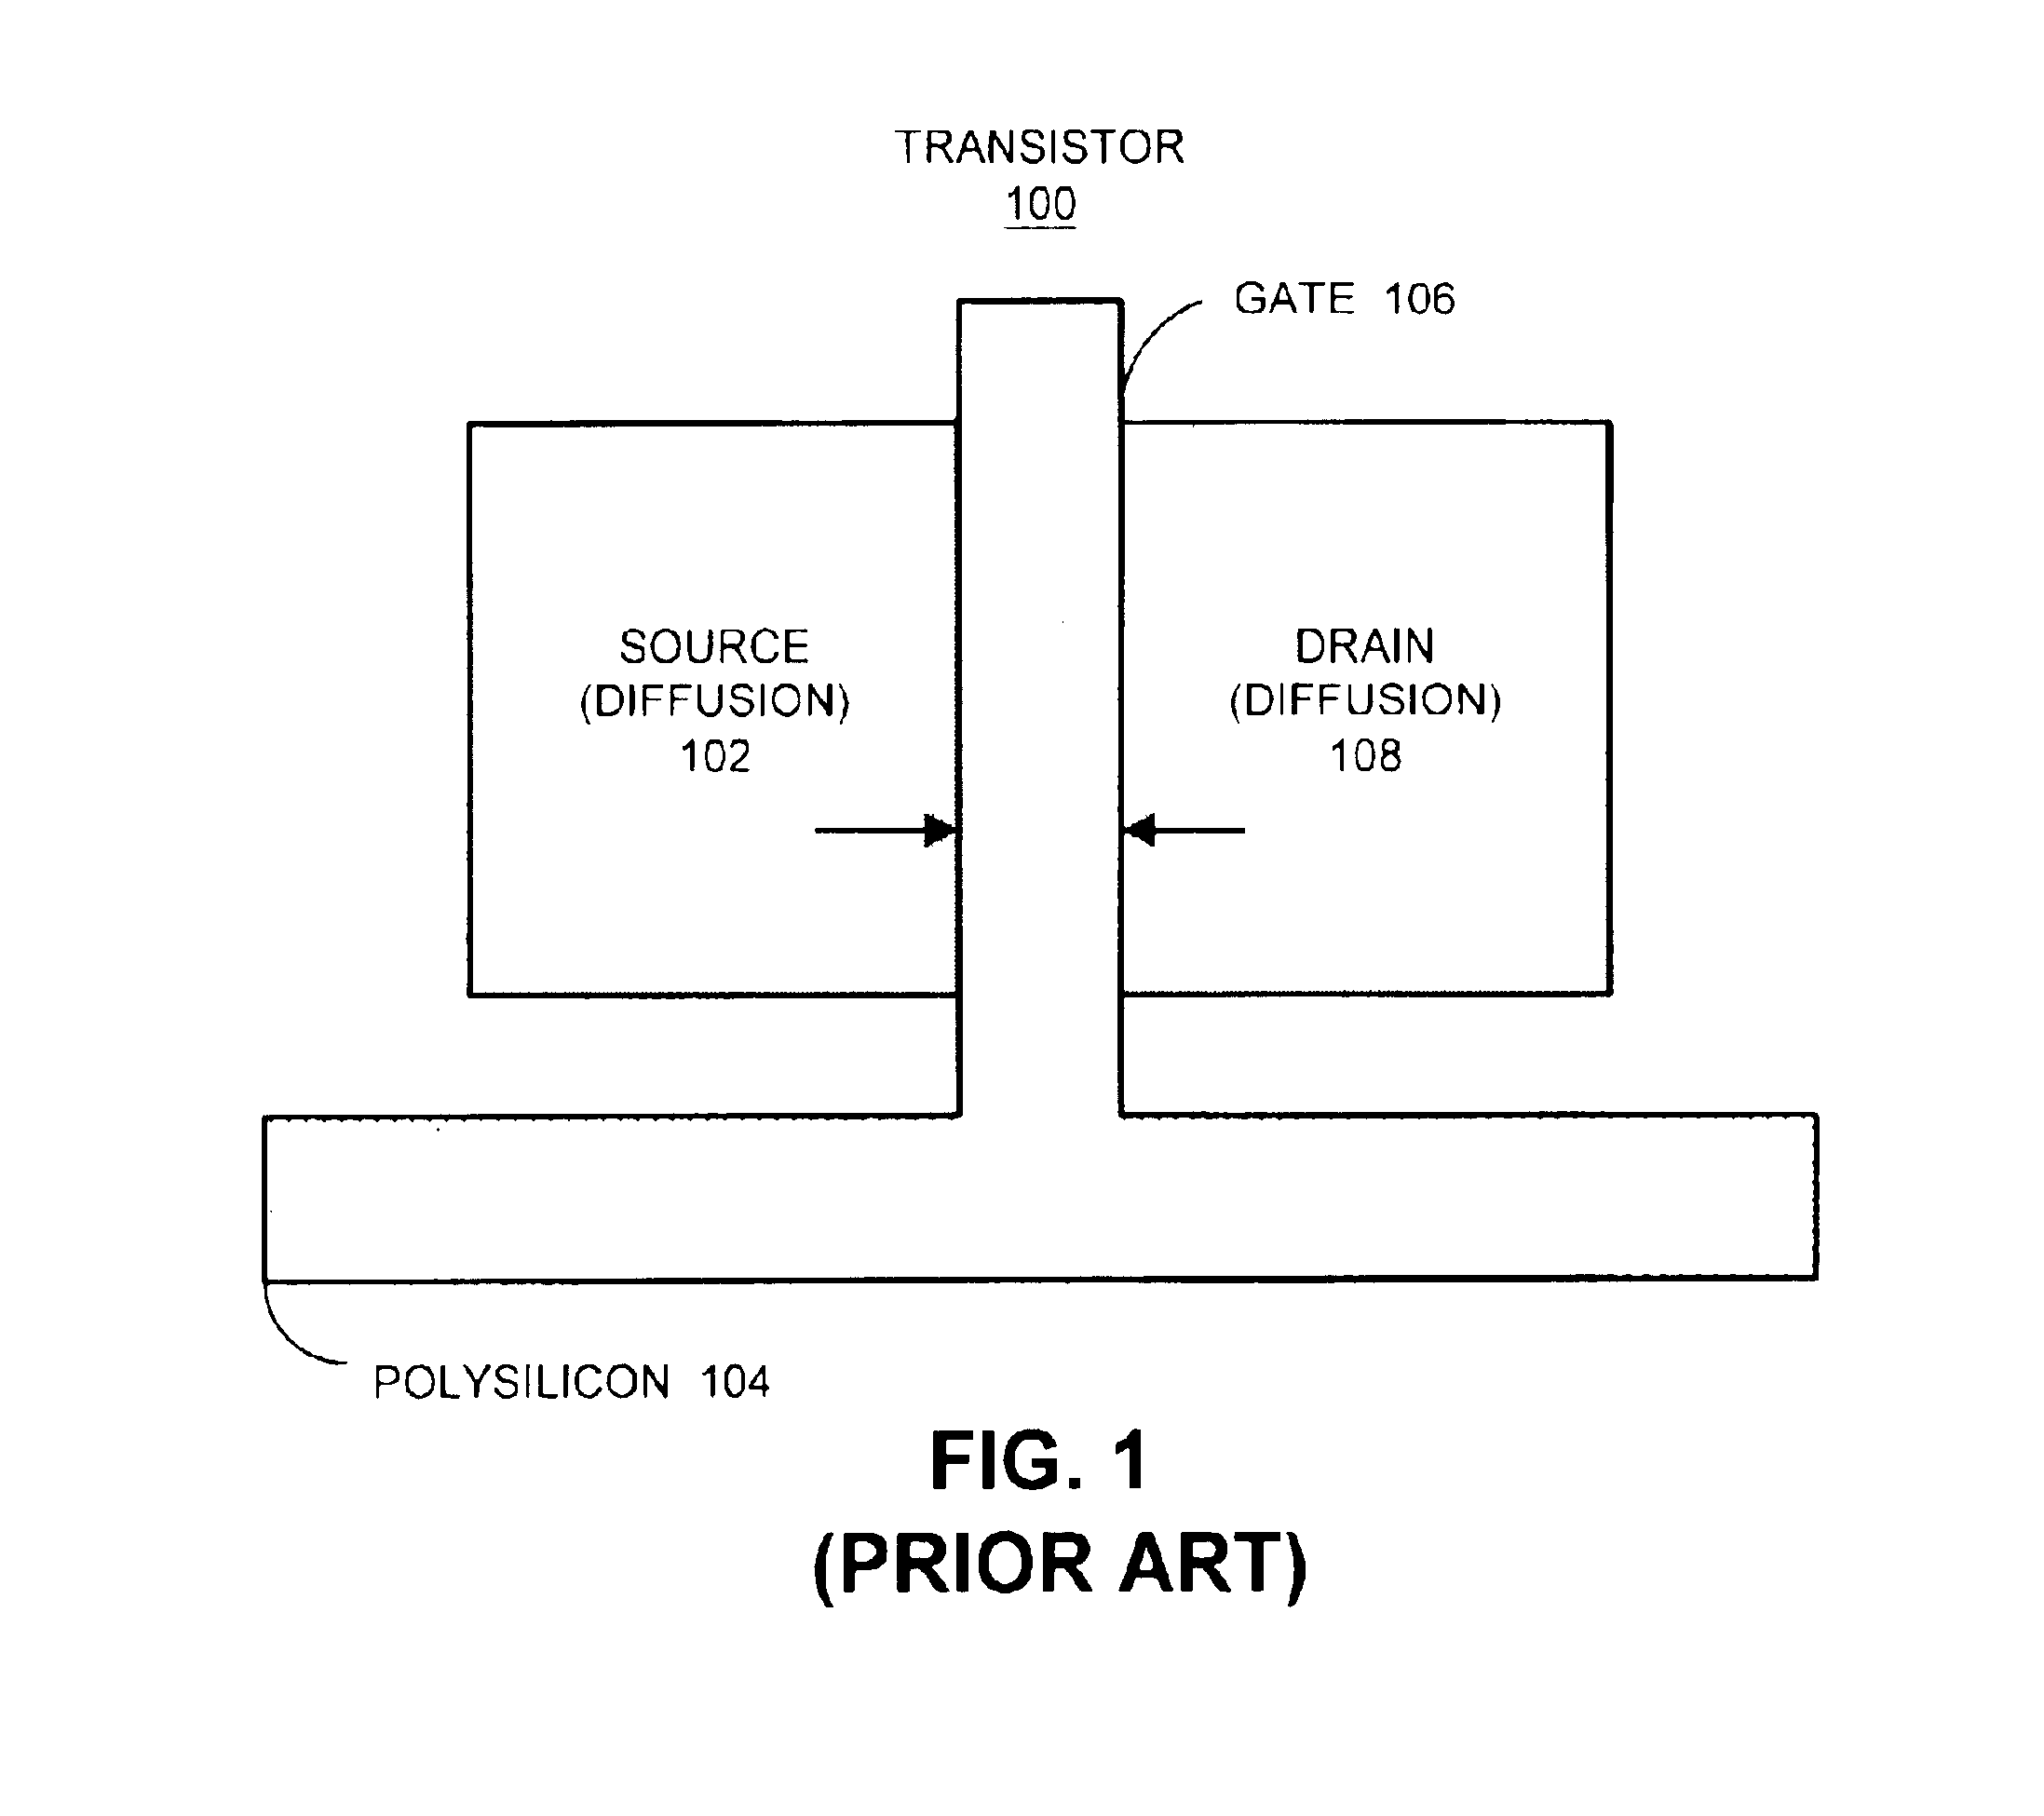 Selectively applying resolution enhancement techniques to improve performance and manufacturing cost of integrated circuits